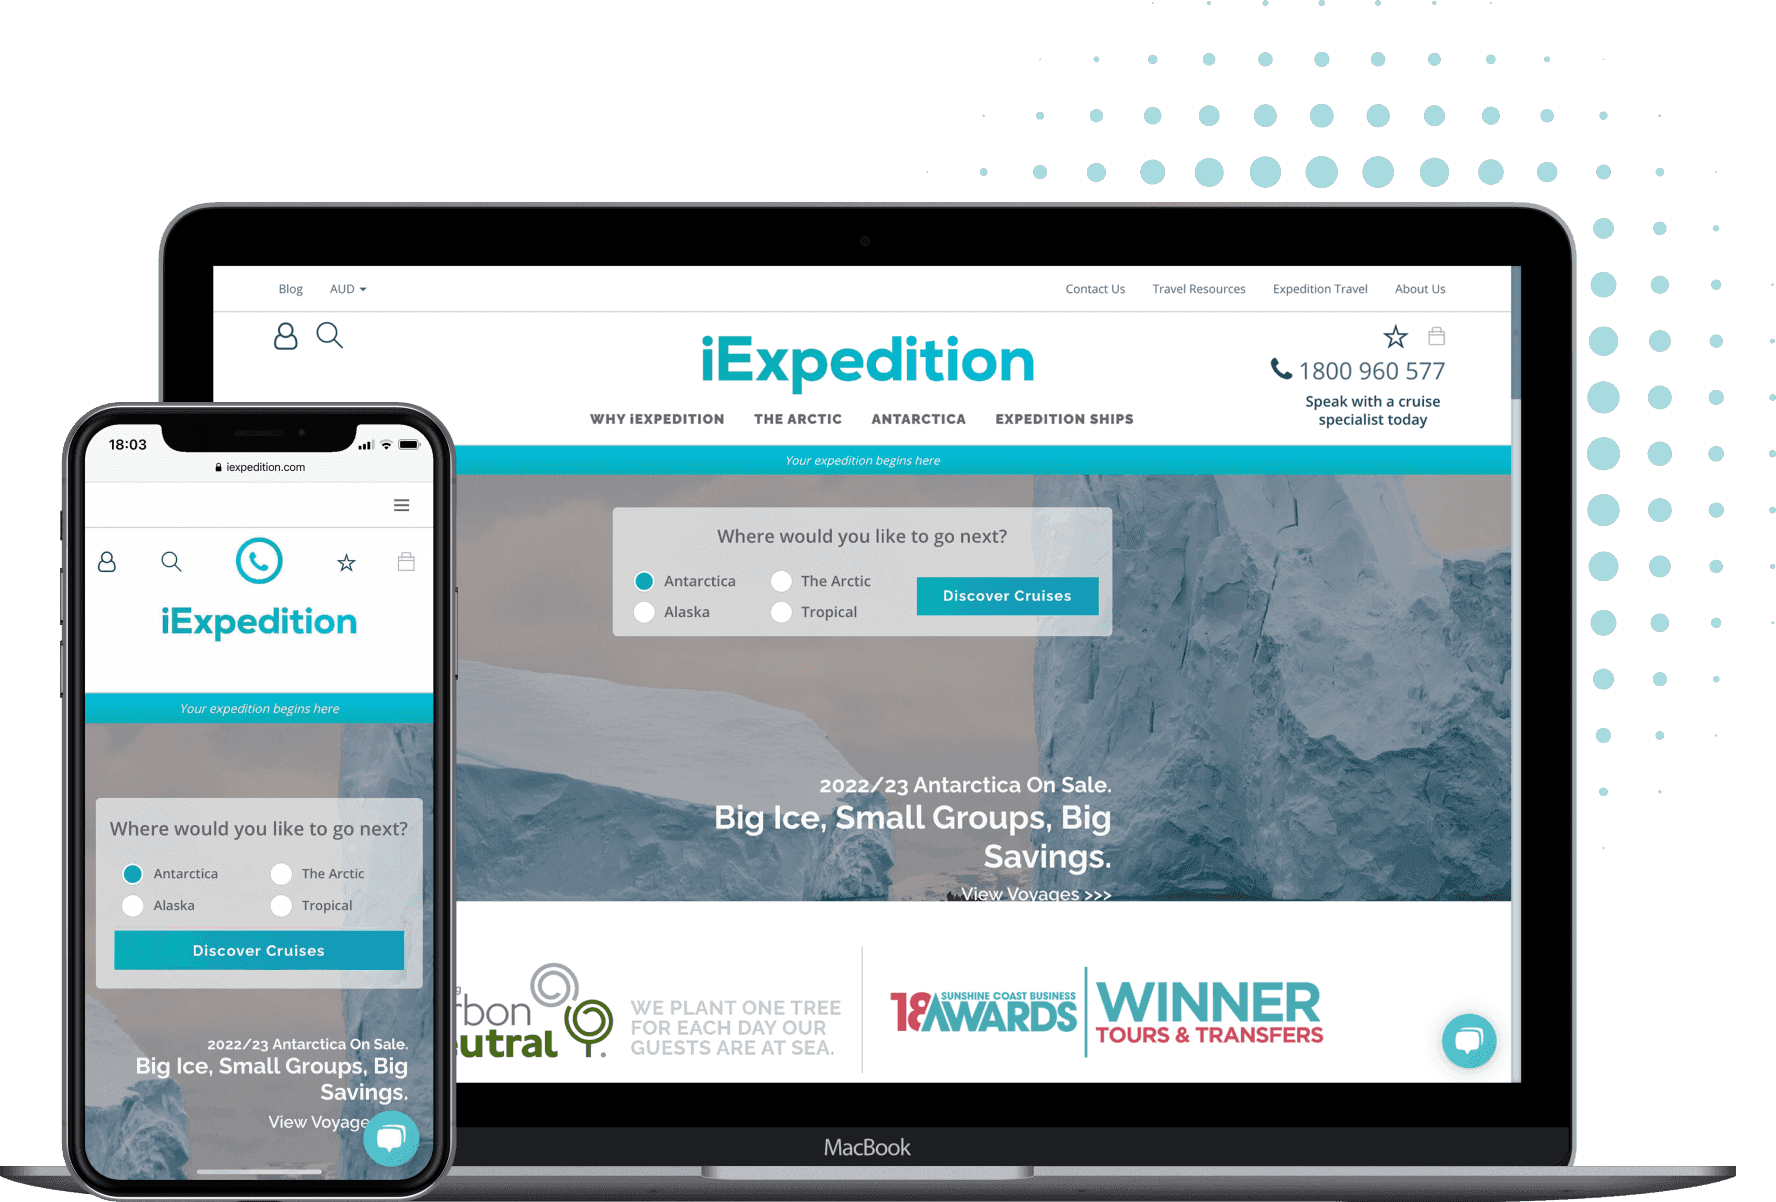 Online travel marketplace for iExpedition